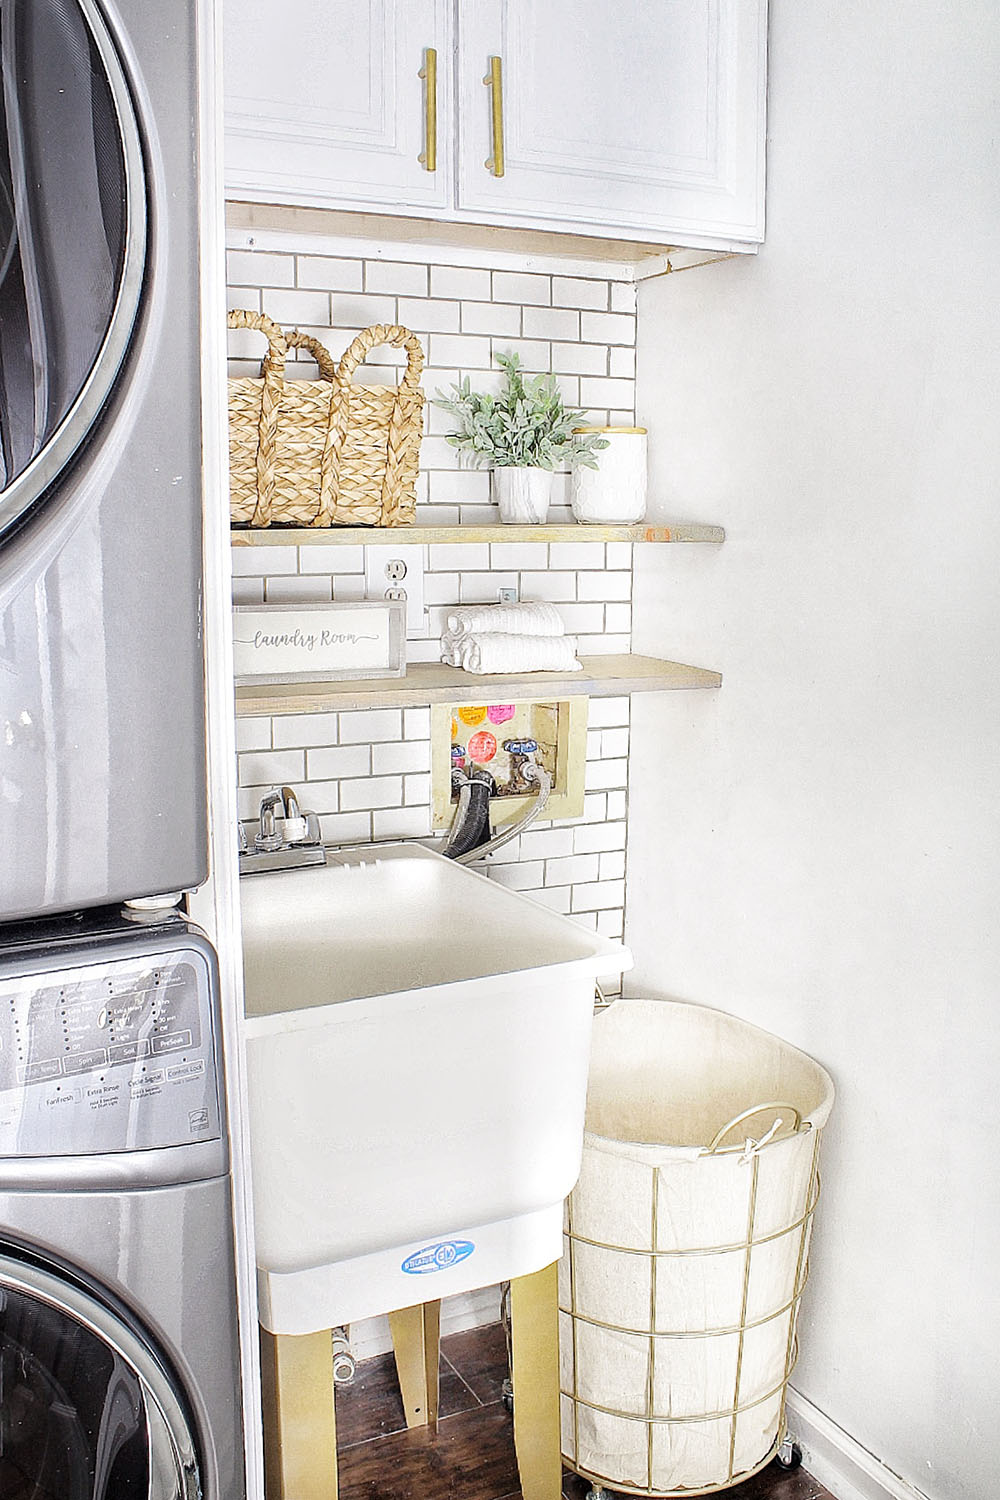 A small laundry room sink with gold legs and a wire and canvas laundry basket.